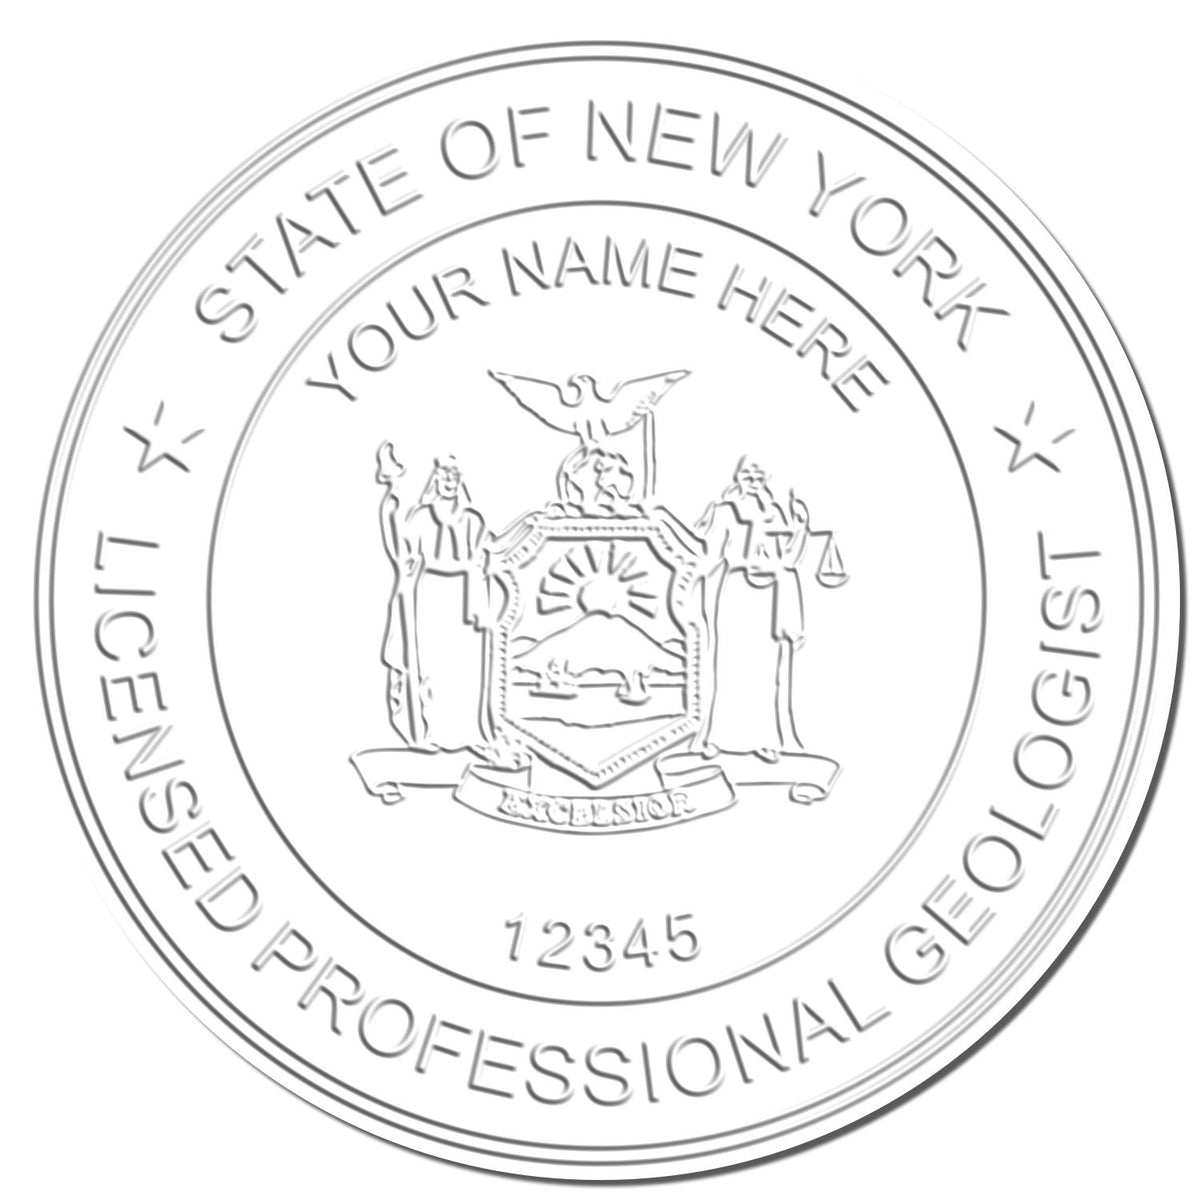 This paper is stamped with a sample imprint of the Handheld New York Professional Geologist Embosser, signifying its quality and reliability.